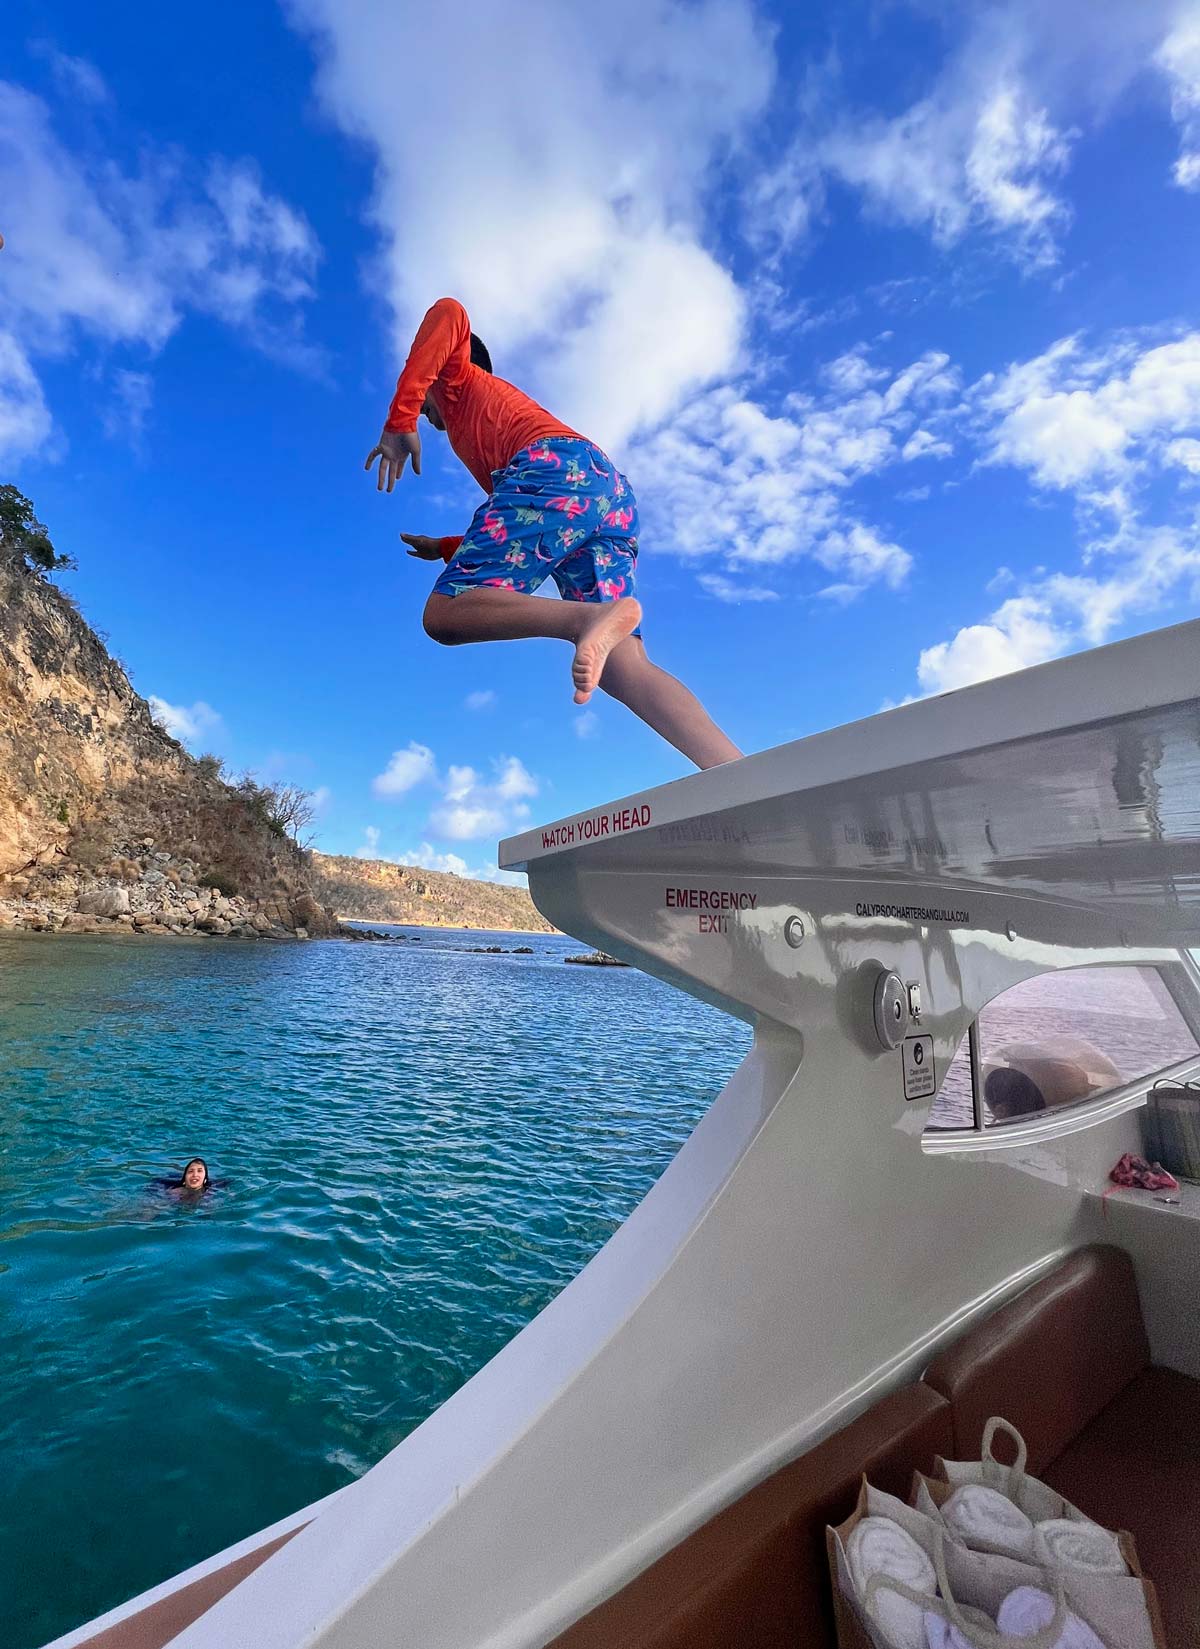 A young boy jumps from a boat into the Caribbean ocean.